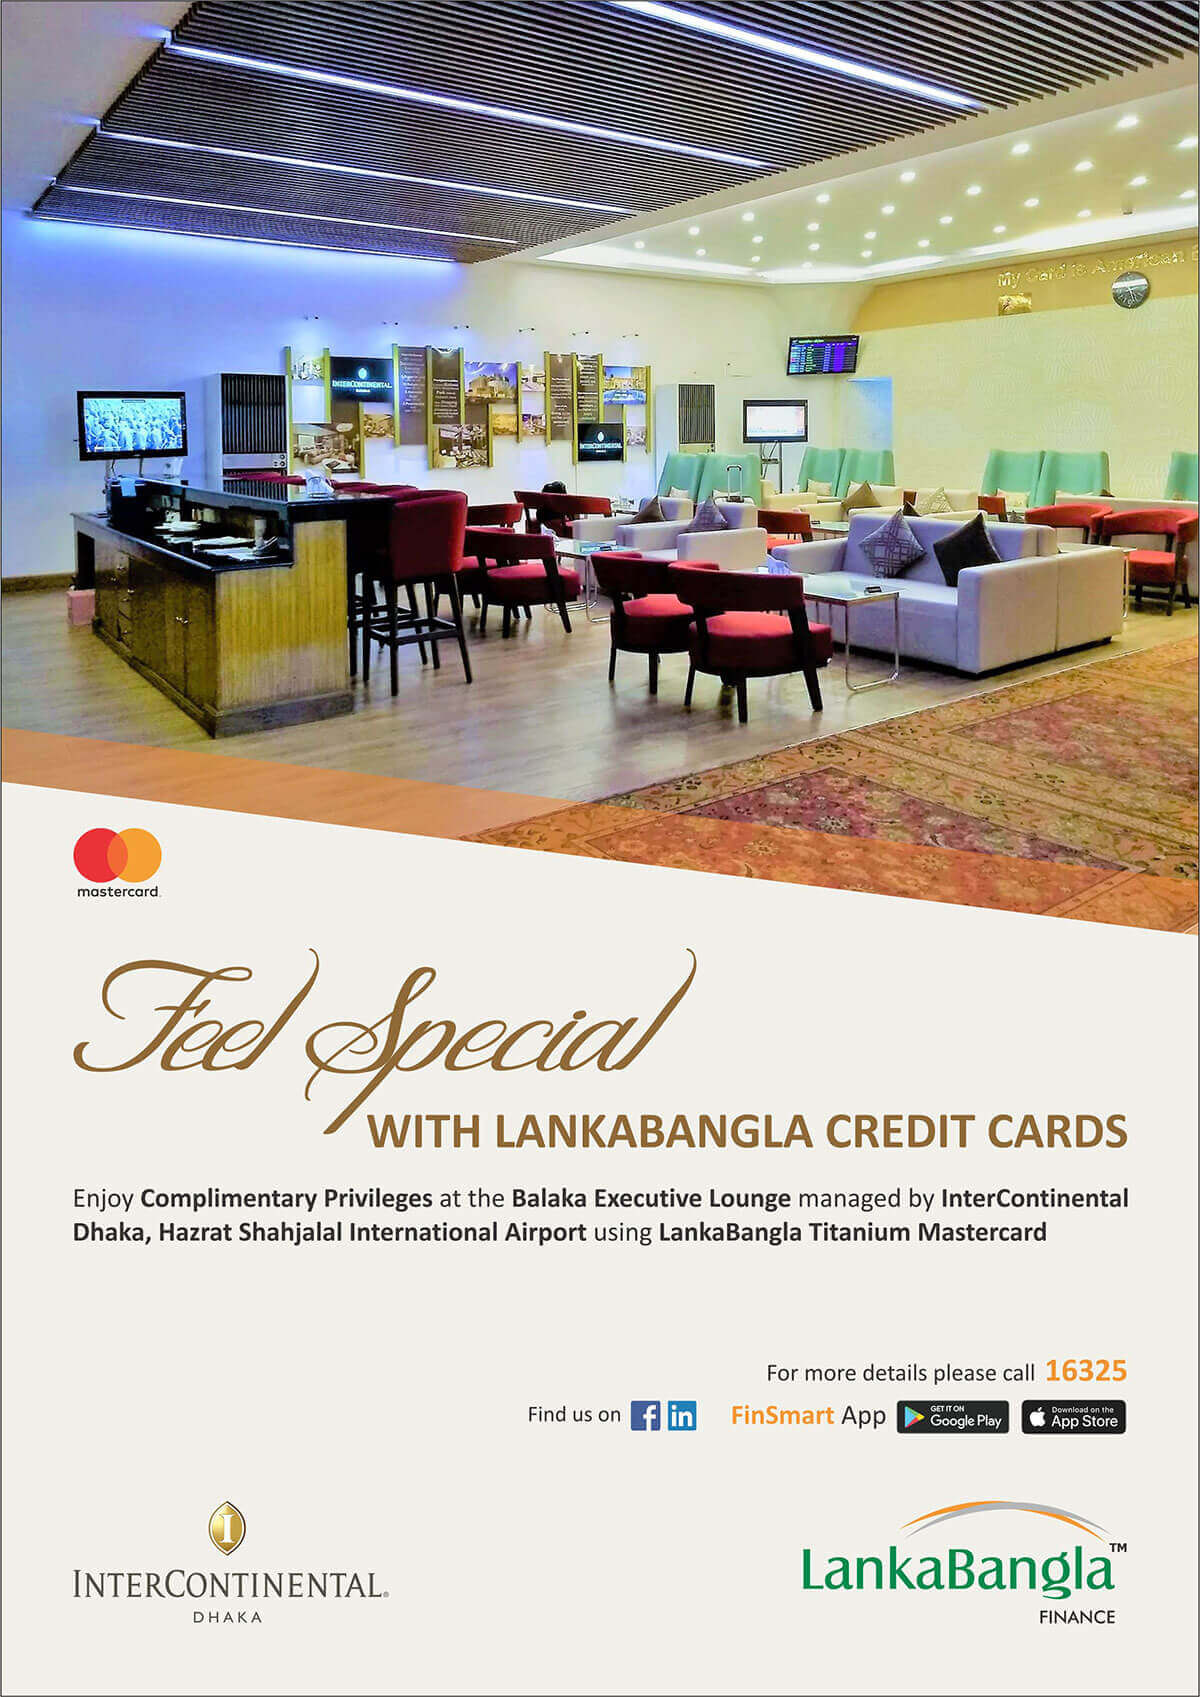 Feel Special With LankaBangla Credit card